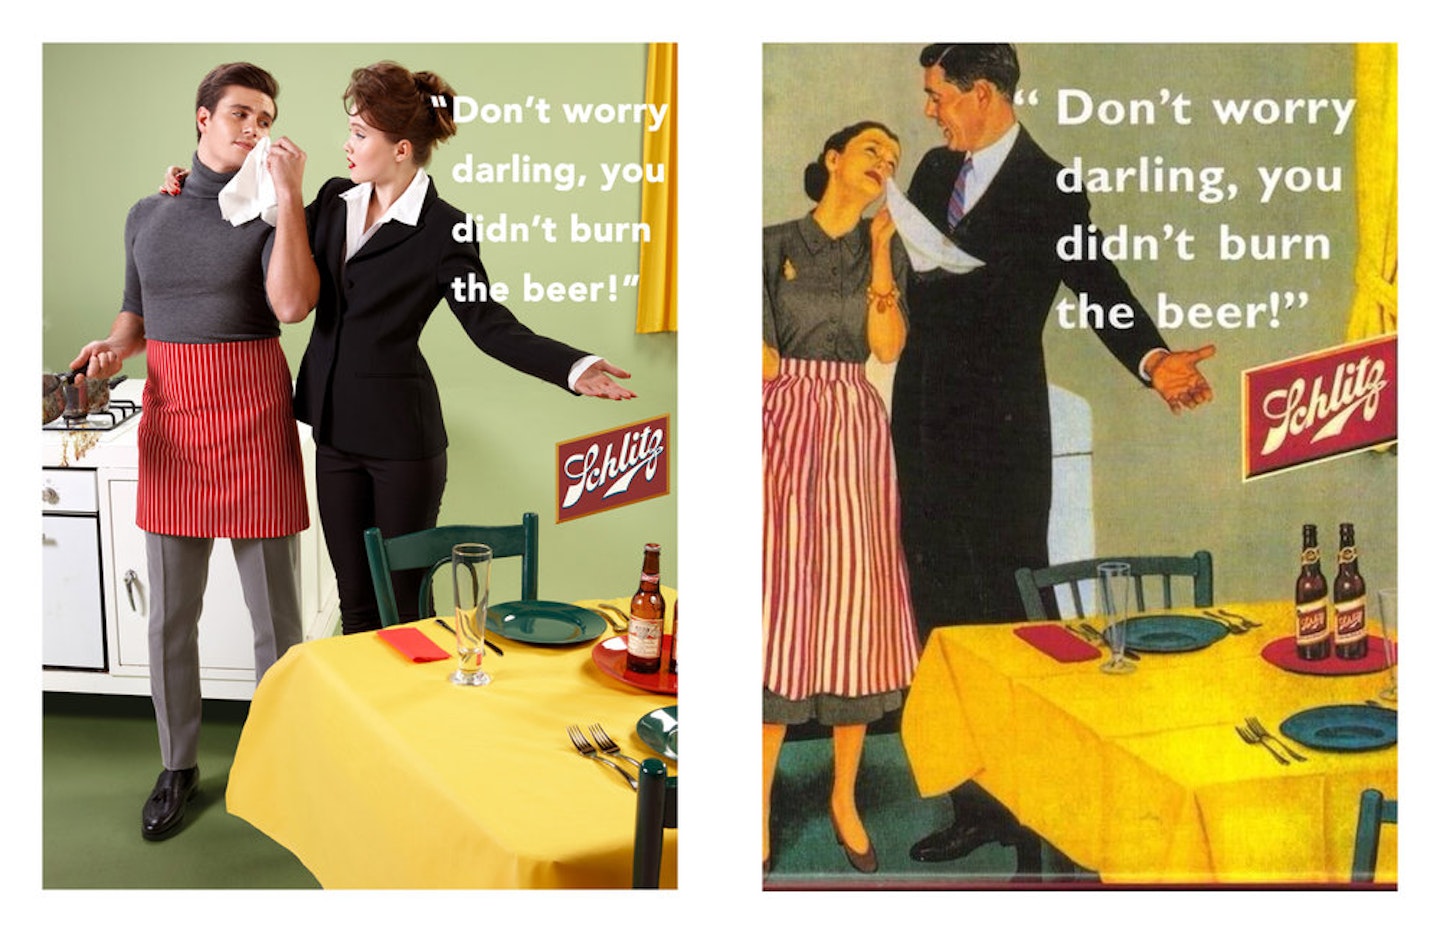 Here’s What Sexist Ads From The 60s Would Look Like If The Gender Roles Were Reversed